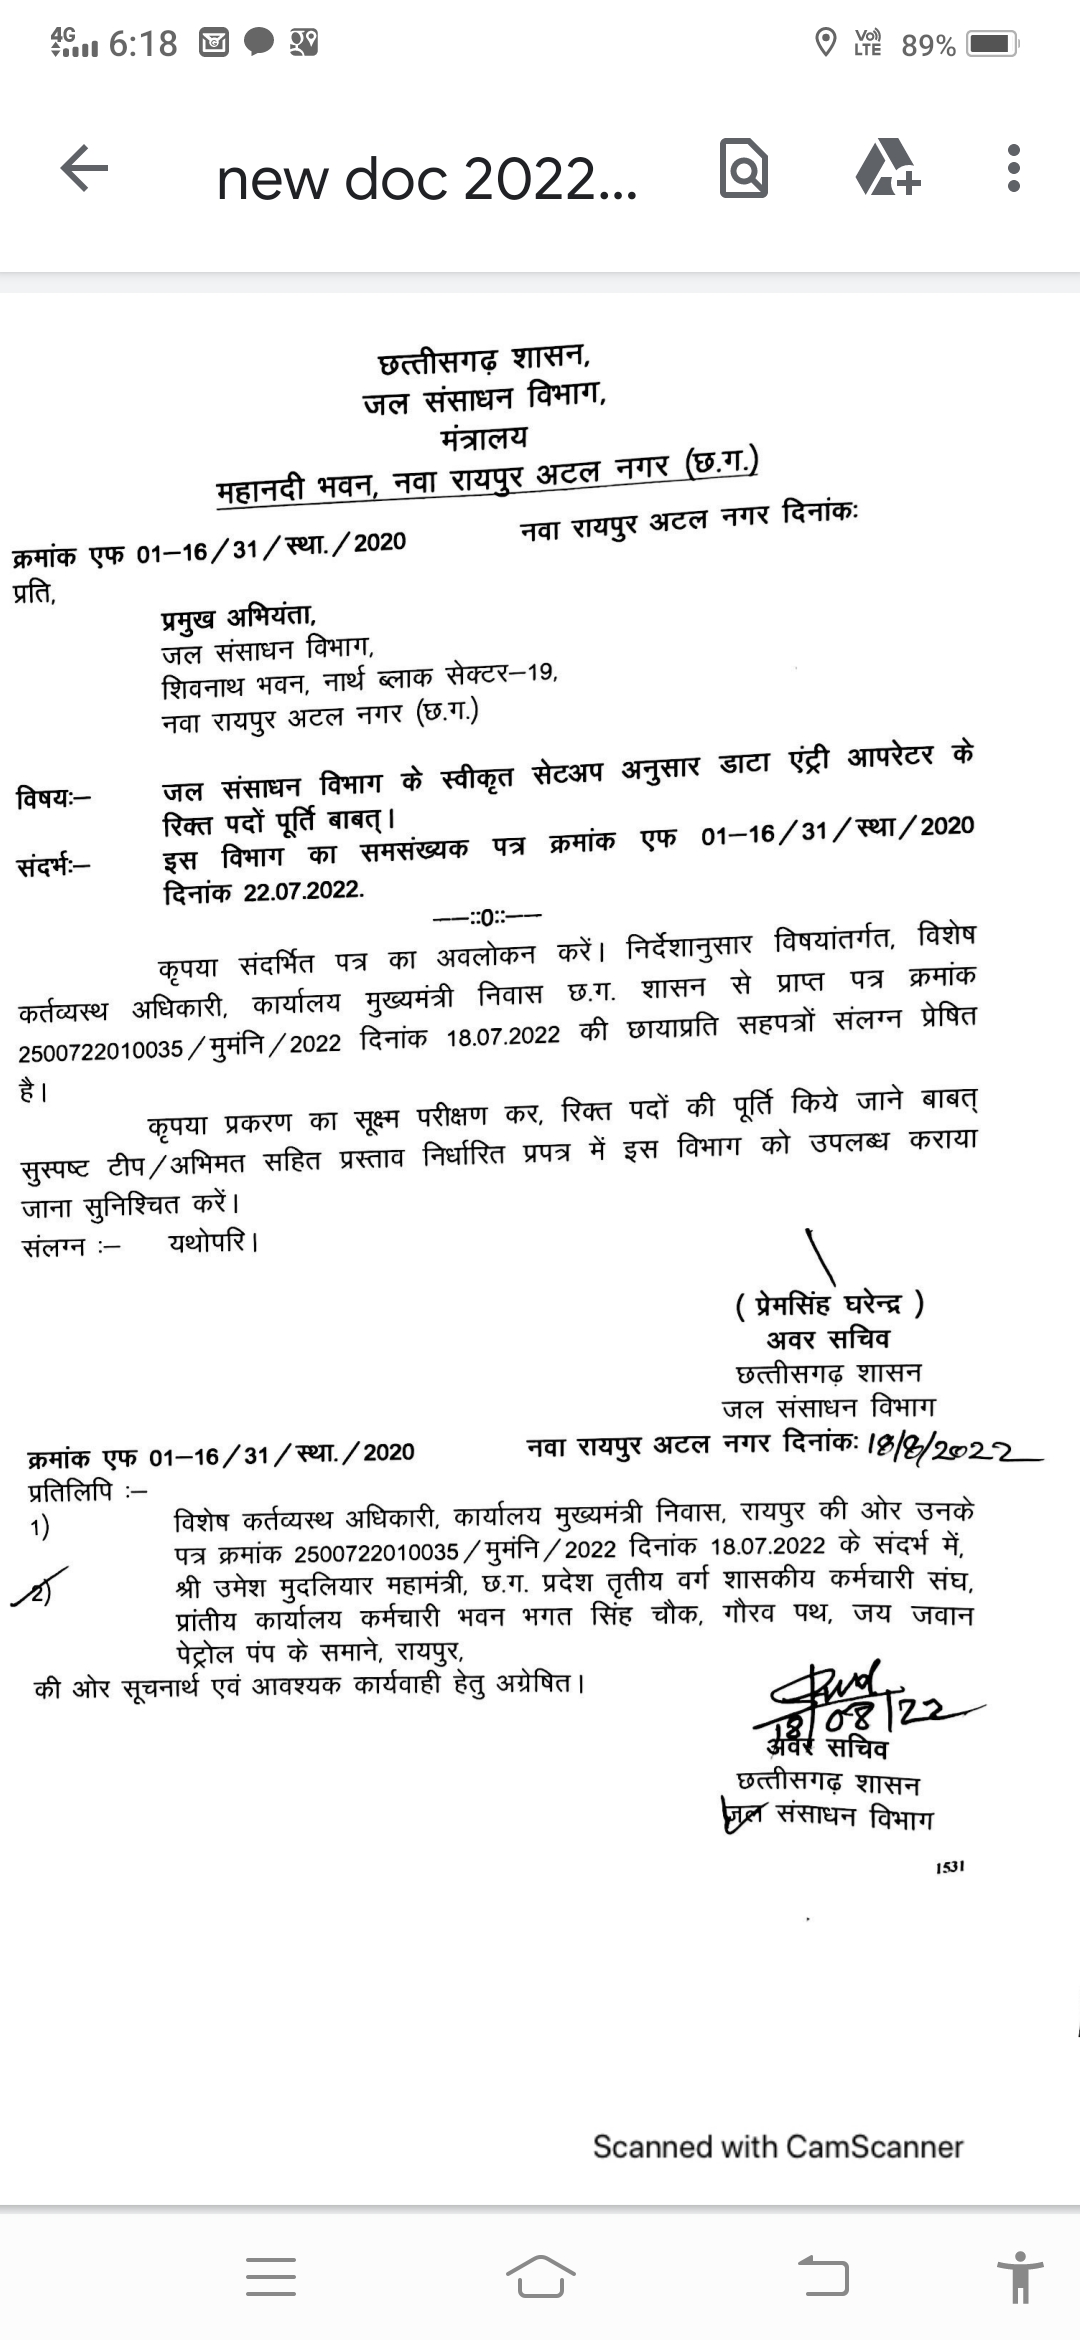 Khabargali Exclusive, Water Resources Department, Bharshahi Recruitment, Chhattisgarh, Under Secretary, Prem Singh Gharendra Grievance Retired Staff Leader, Compassionate Appointment, Transfer, Out Sourcing, Computer Operator, Driver, Chowkidar, Waterman, Dakner, Economic, Mental Abuse, Duty Report, Public Service Commission, Professional Examination